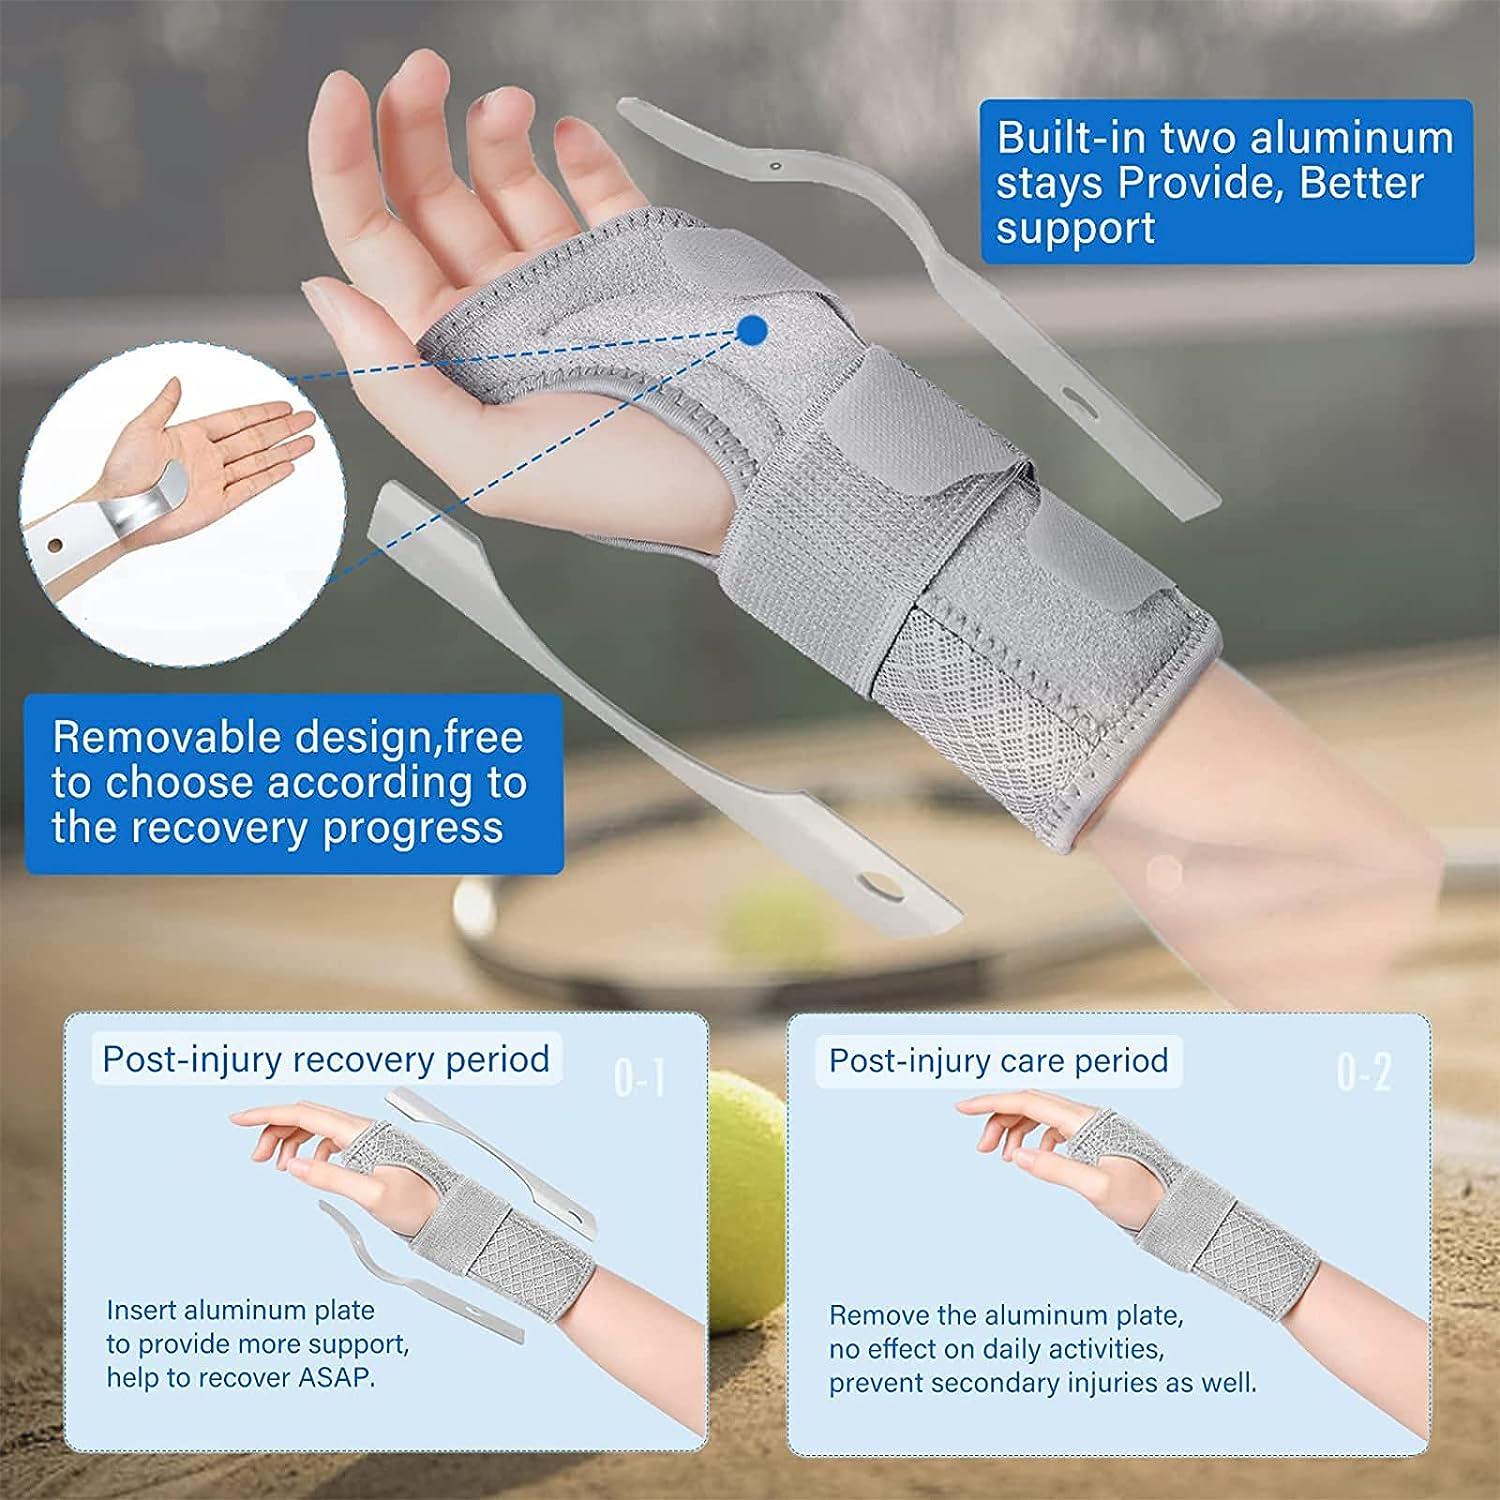 Elastic medical wrist joint bandage with a removable metallic